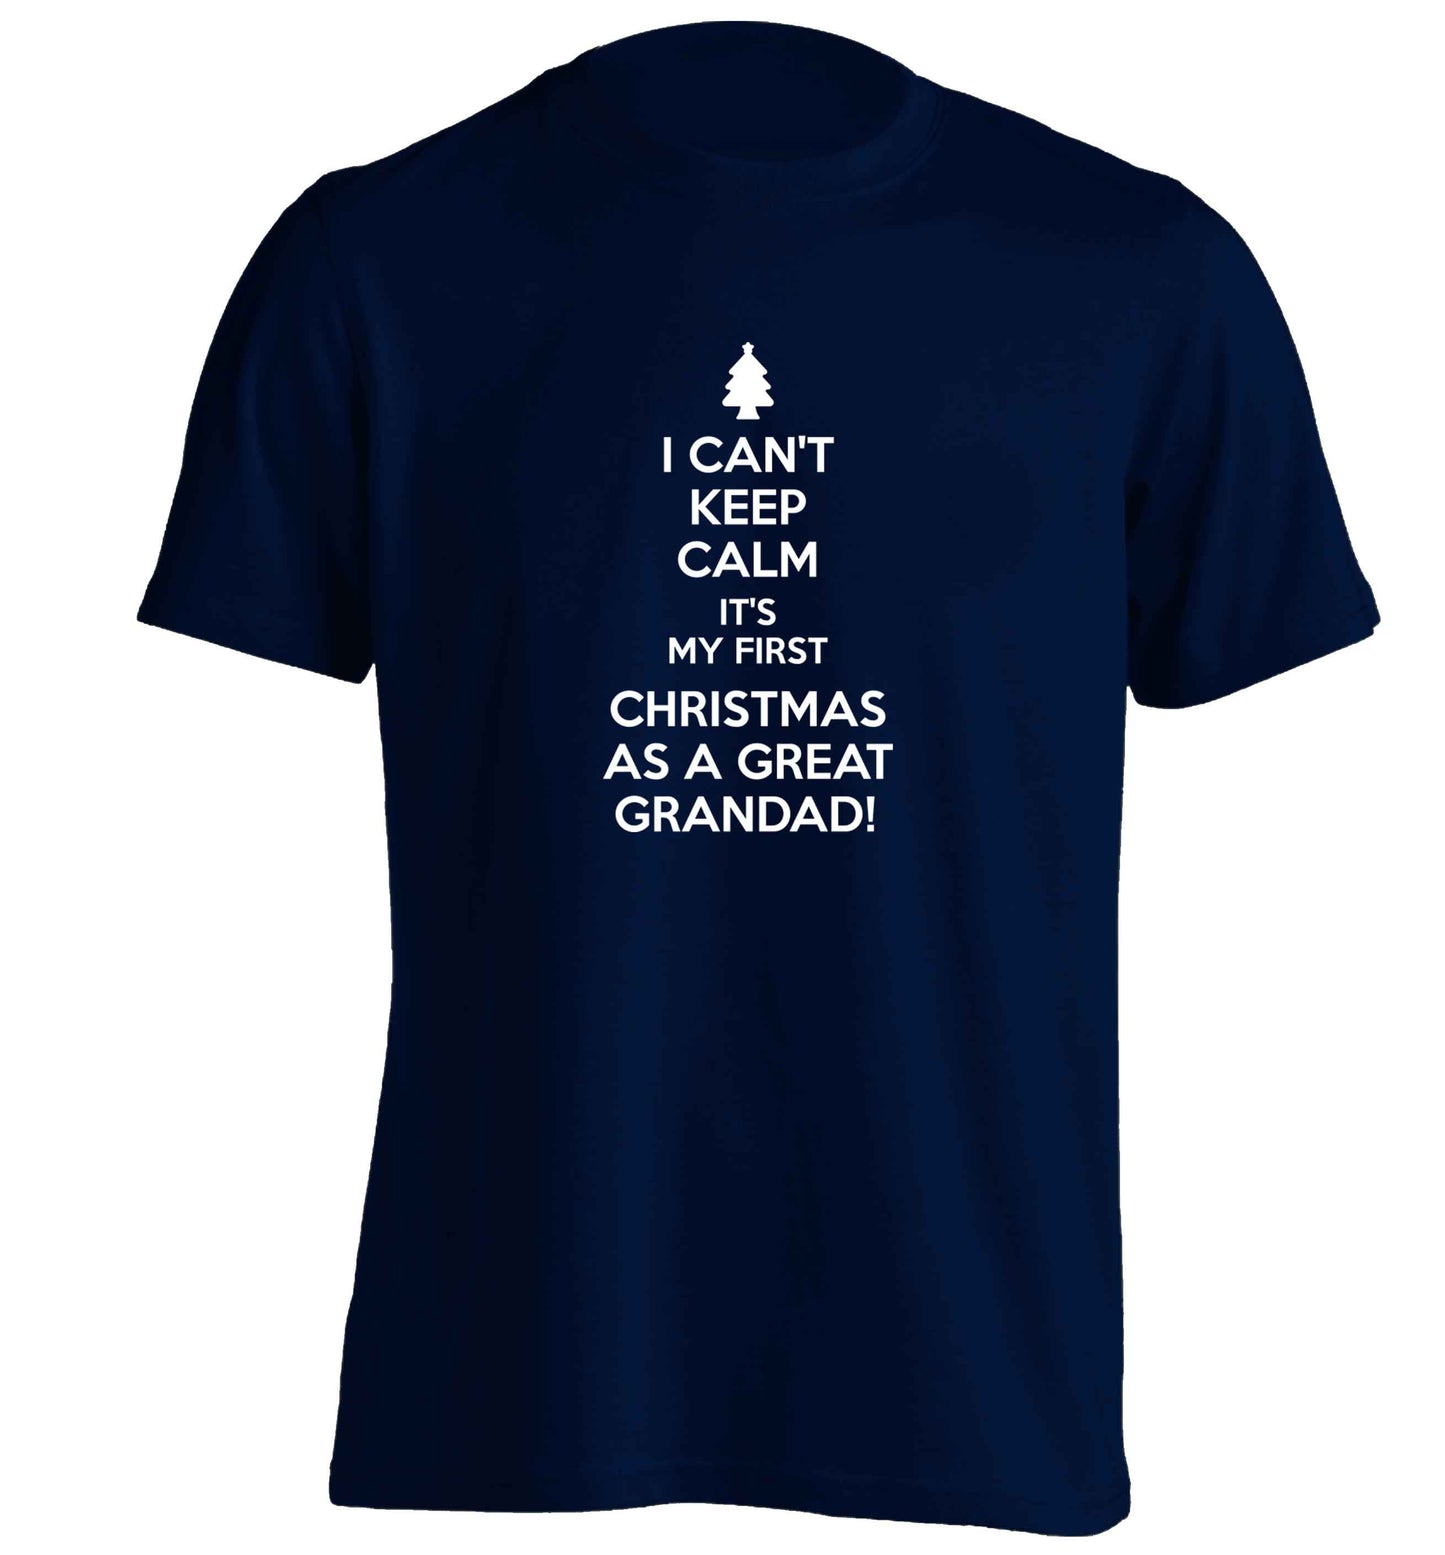 I can't keep calm it's my first Christmas as a great grandad! adults unisex navy Tshirt 2XL